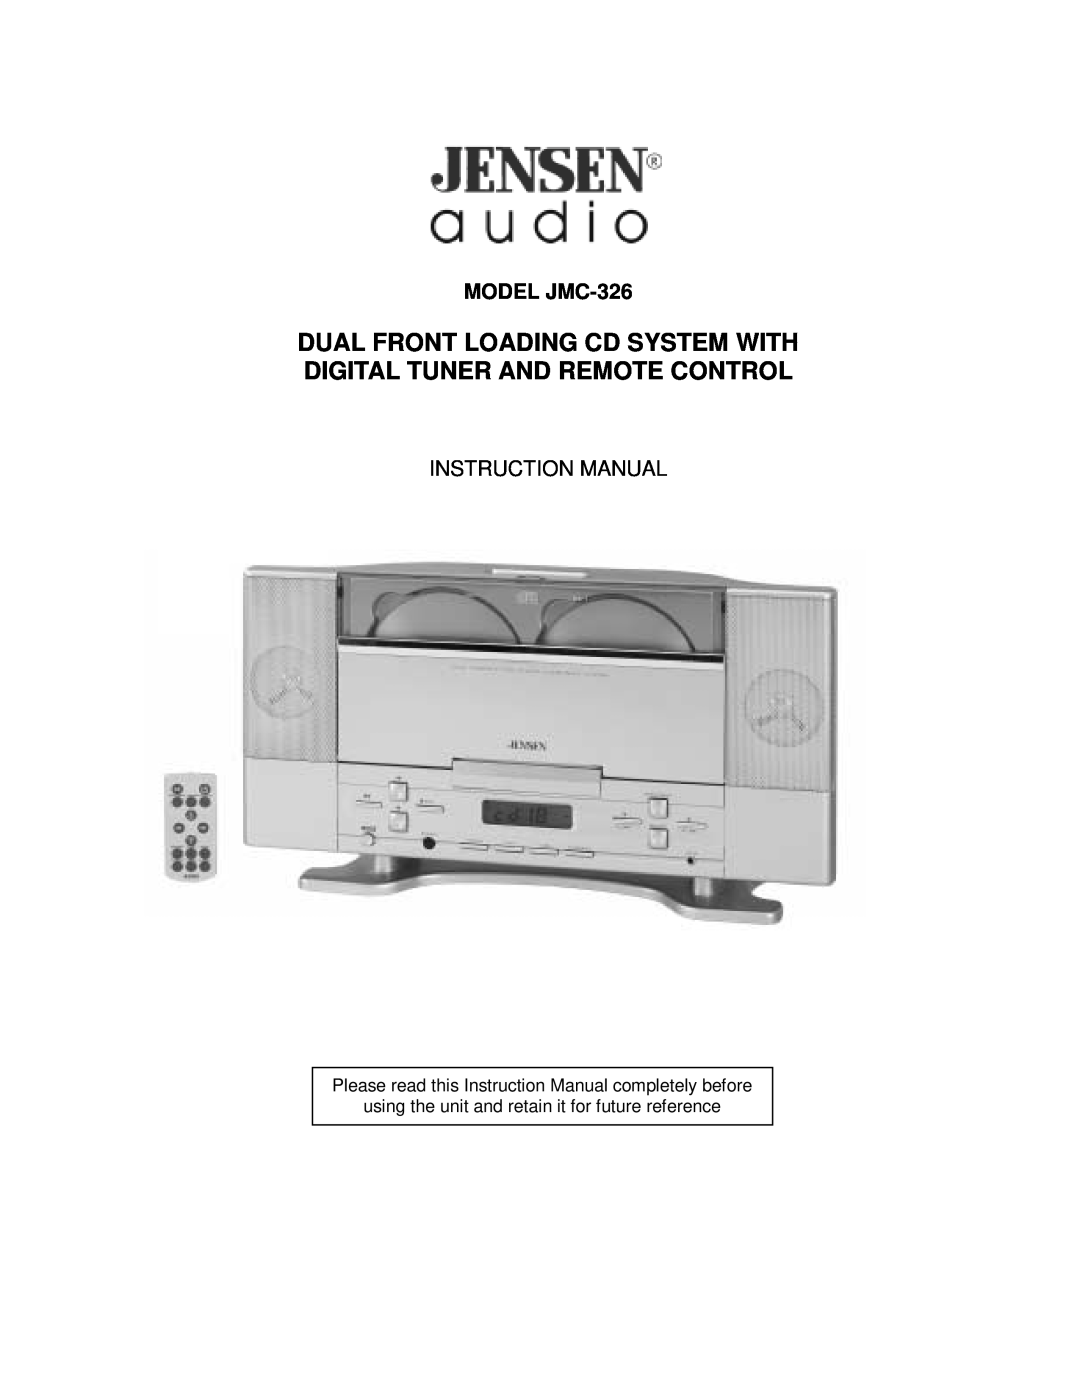 Jensen instruction manual MODEL JMC-326, using the unit and retain it for future reference 